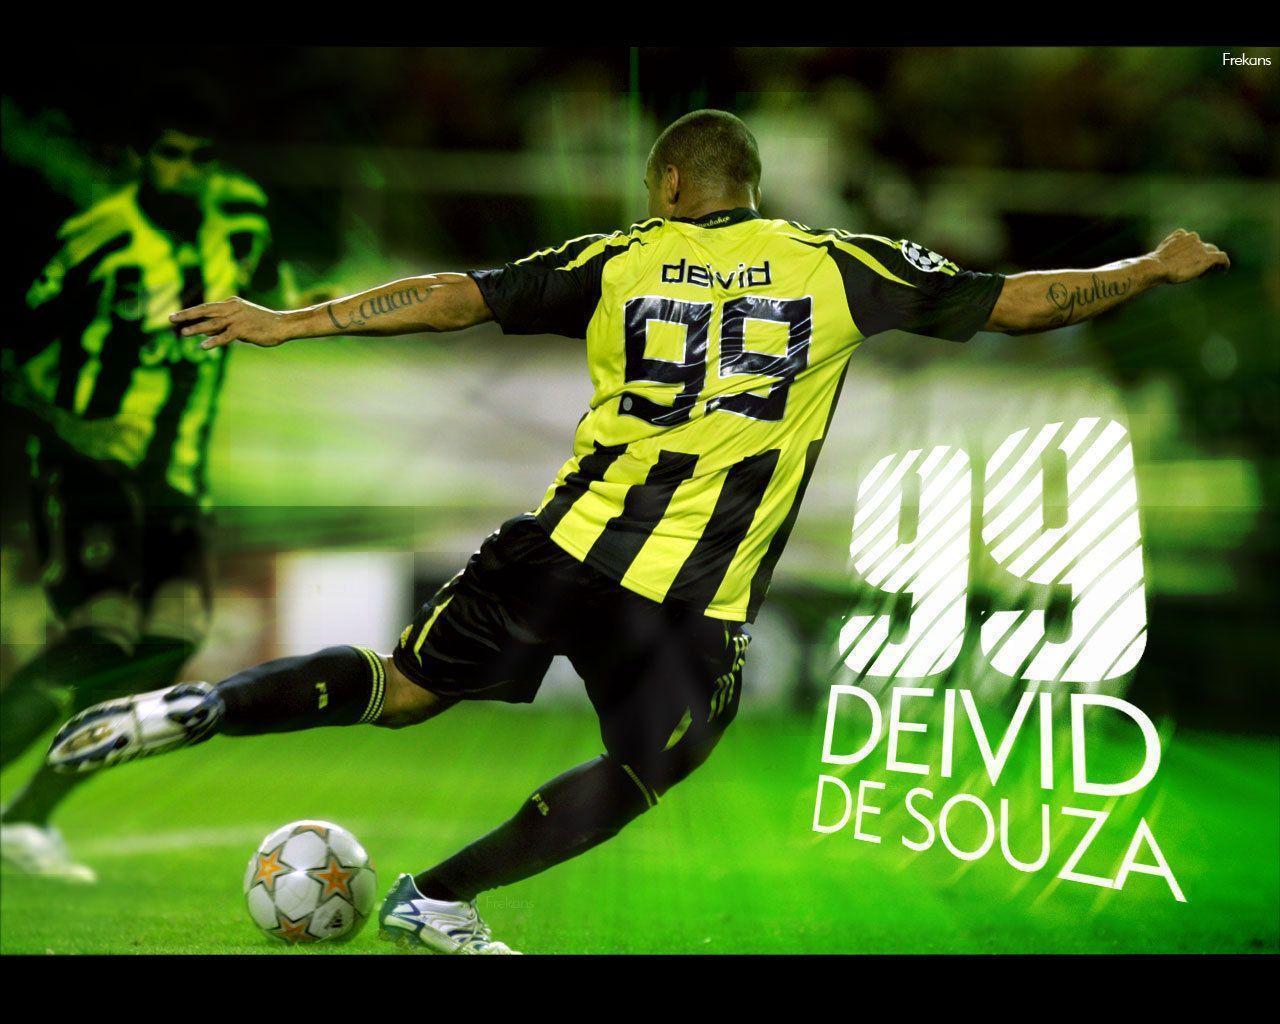 Fenerbahçe SK image FB436 HD wallpaper and background photo